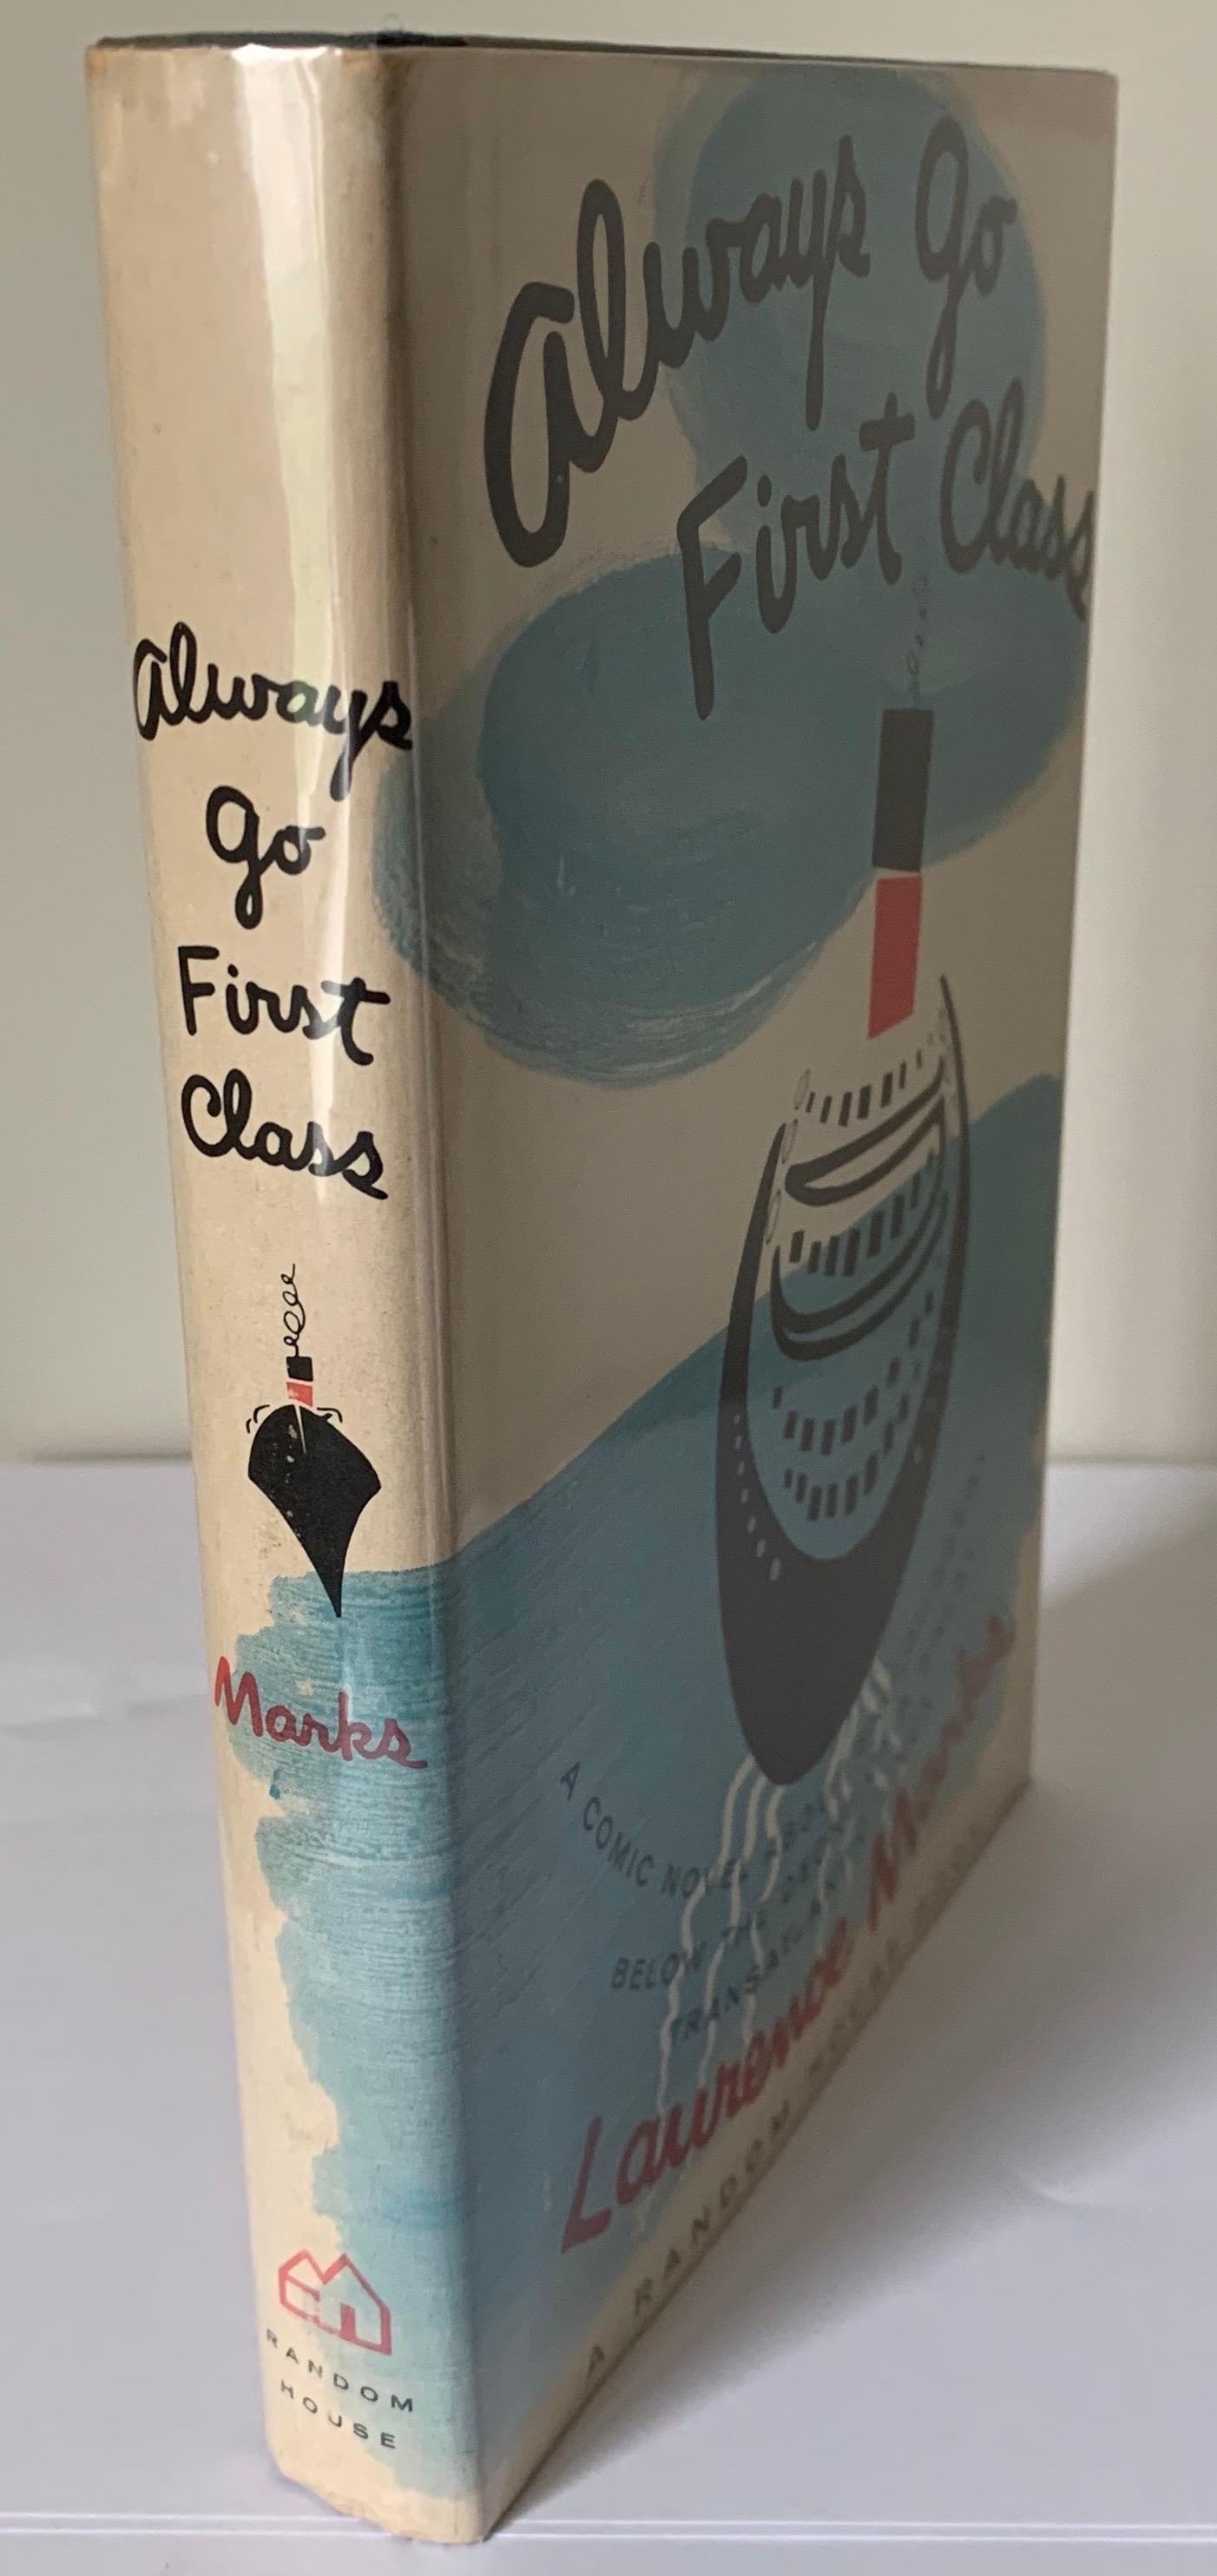 Always Go First Class by Laurence Marks. First Edition hardcover. Published by Random House, New York, 1962. Dust-jacket is wrapped in Mylar.